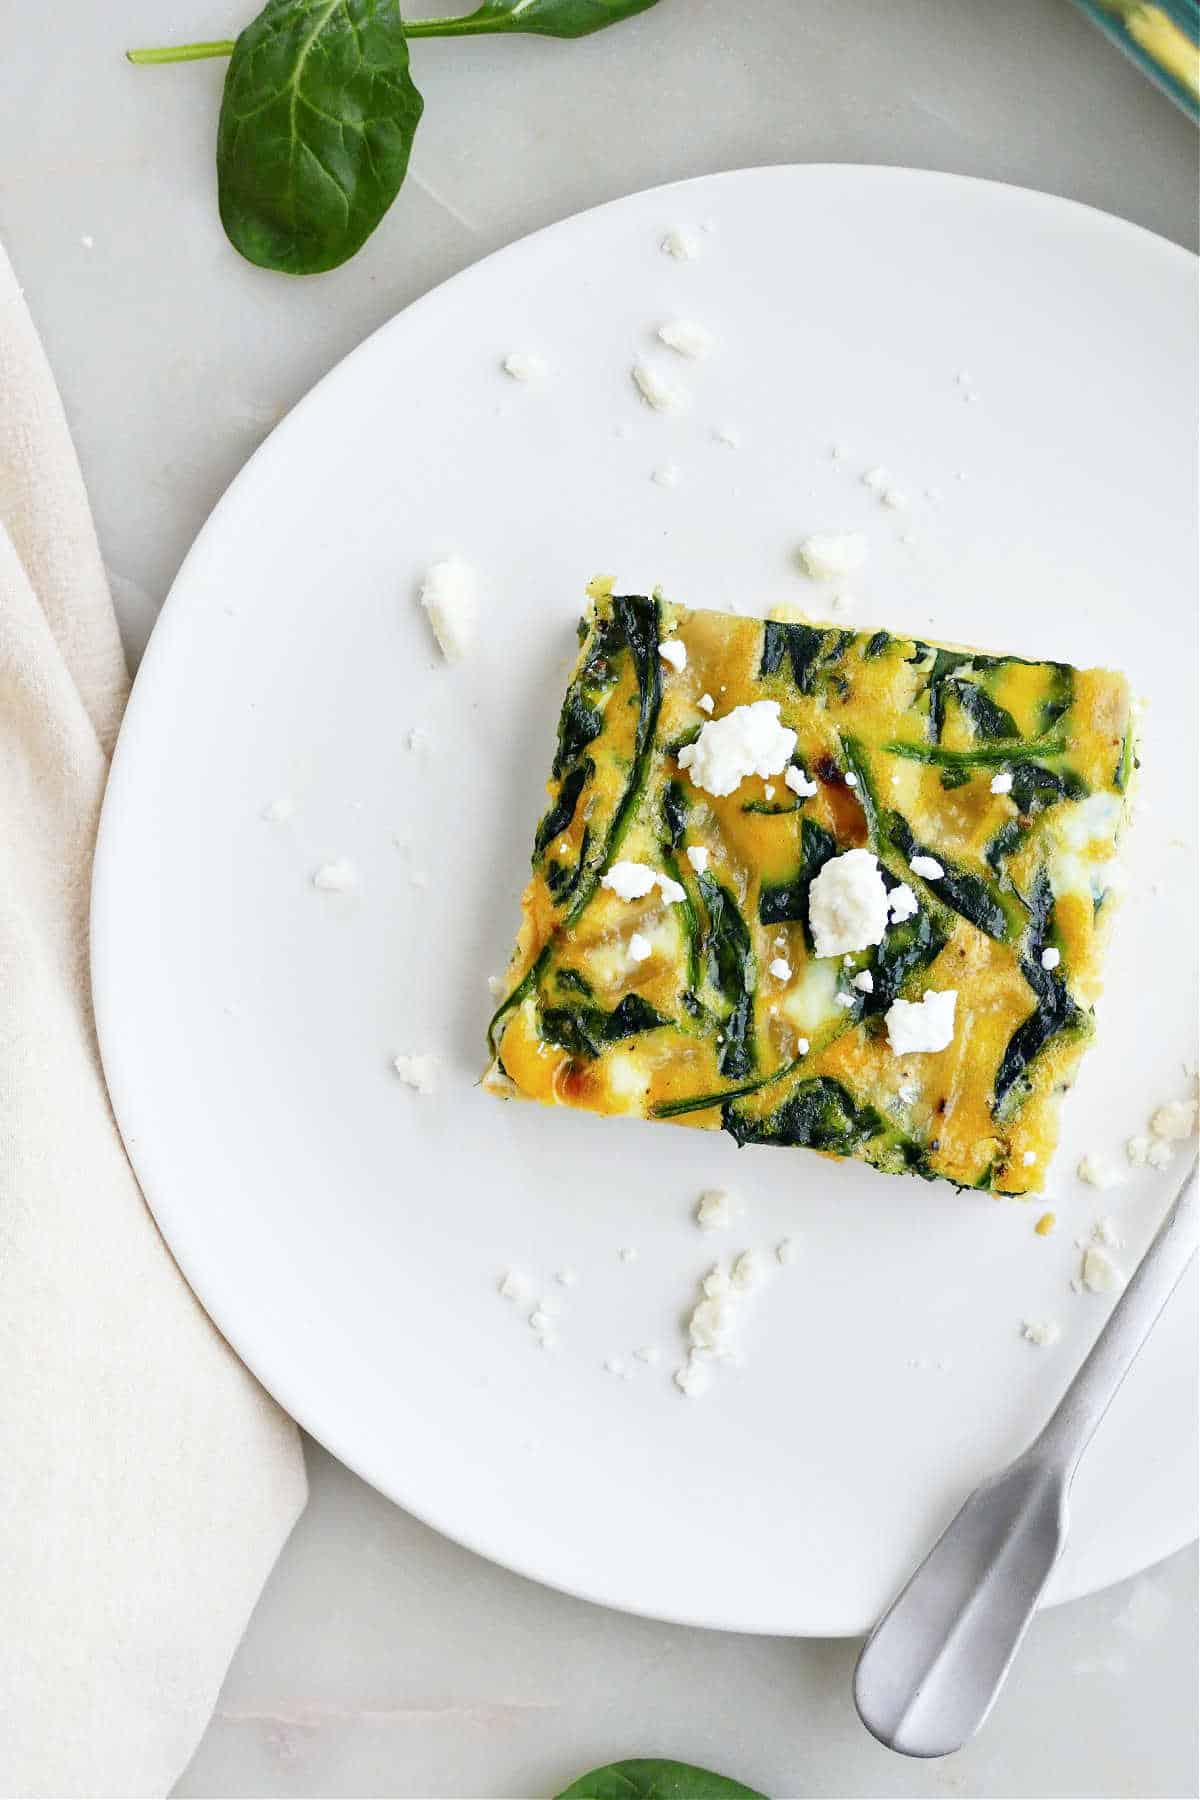 A square of spinach feta egg bake on a plate topped with more feta cheese.